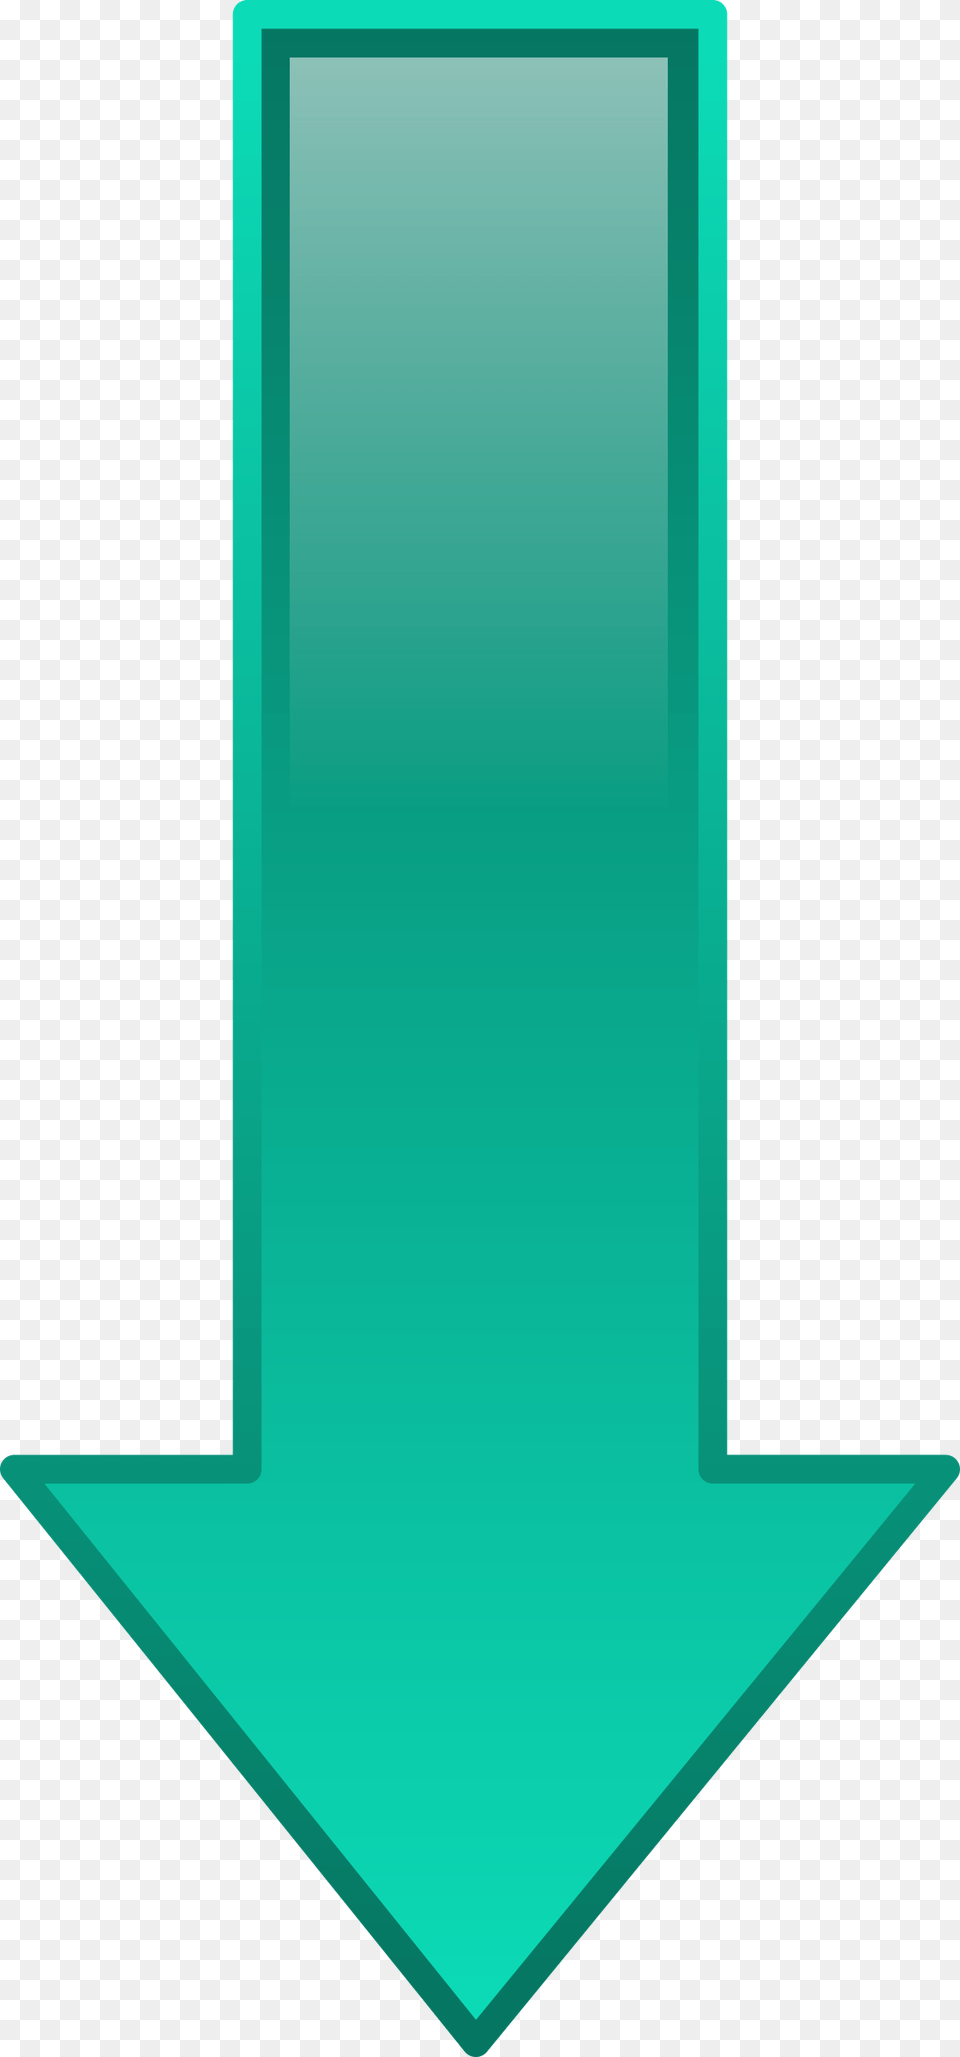 This Icons Design Of Arrow Down Cyan Free Png